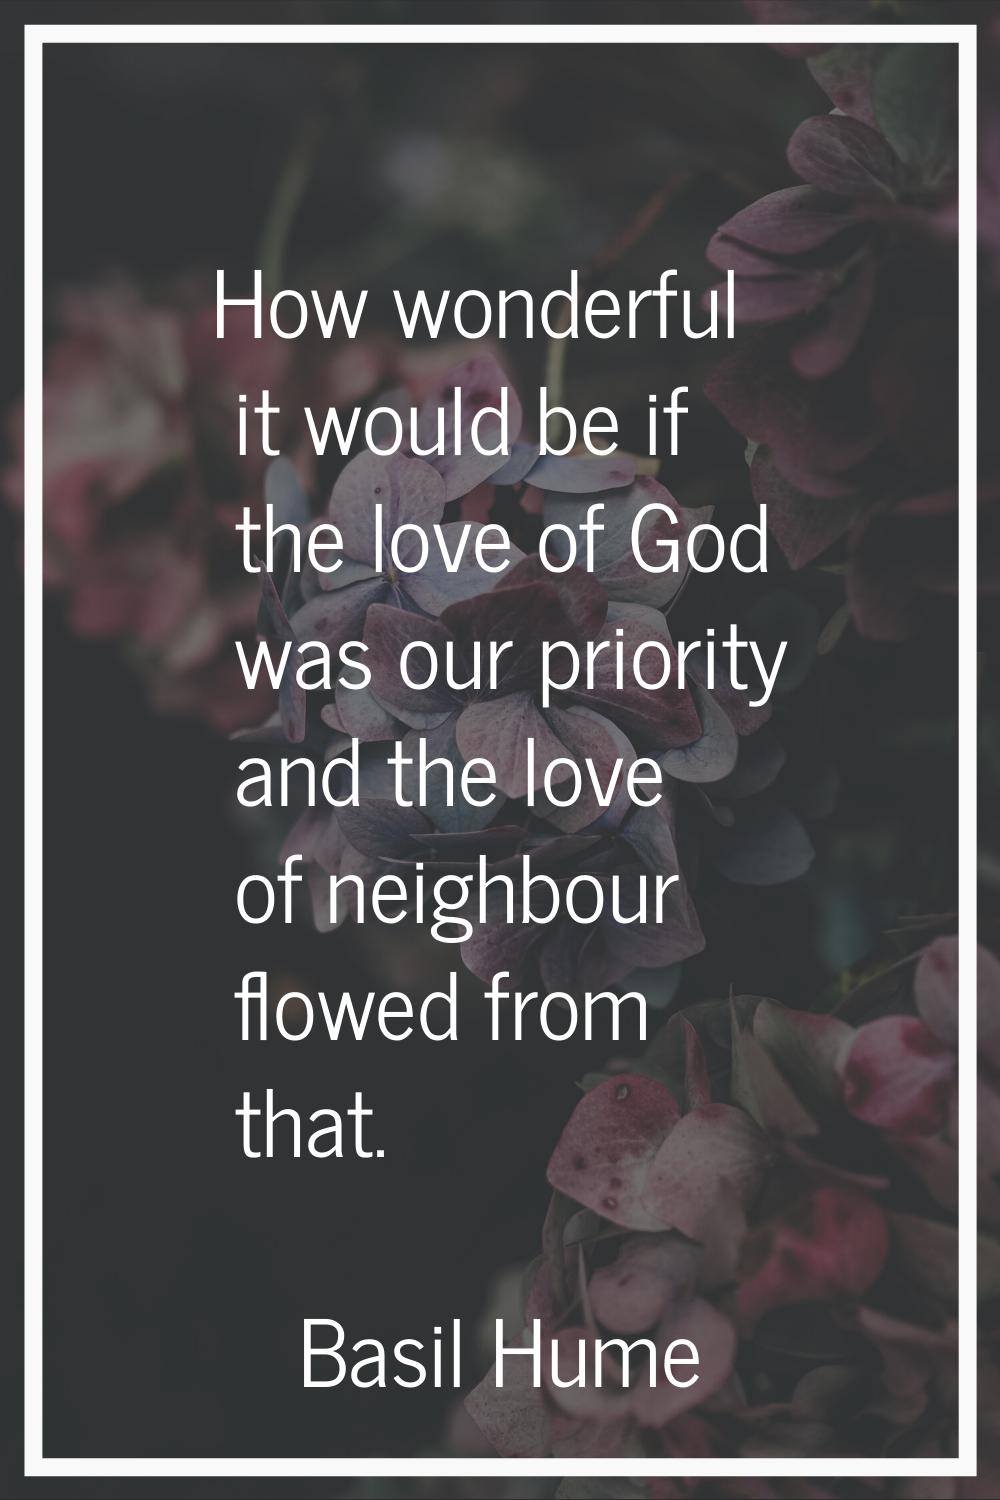 How wonderful it would be if the love of God was our priority and the love of neighbour flowed from